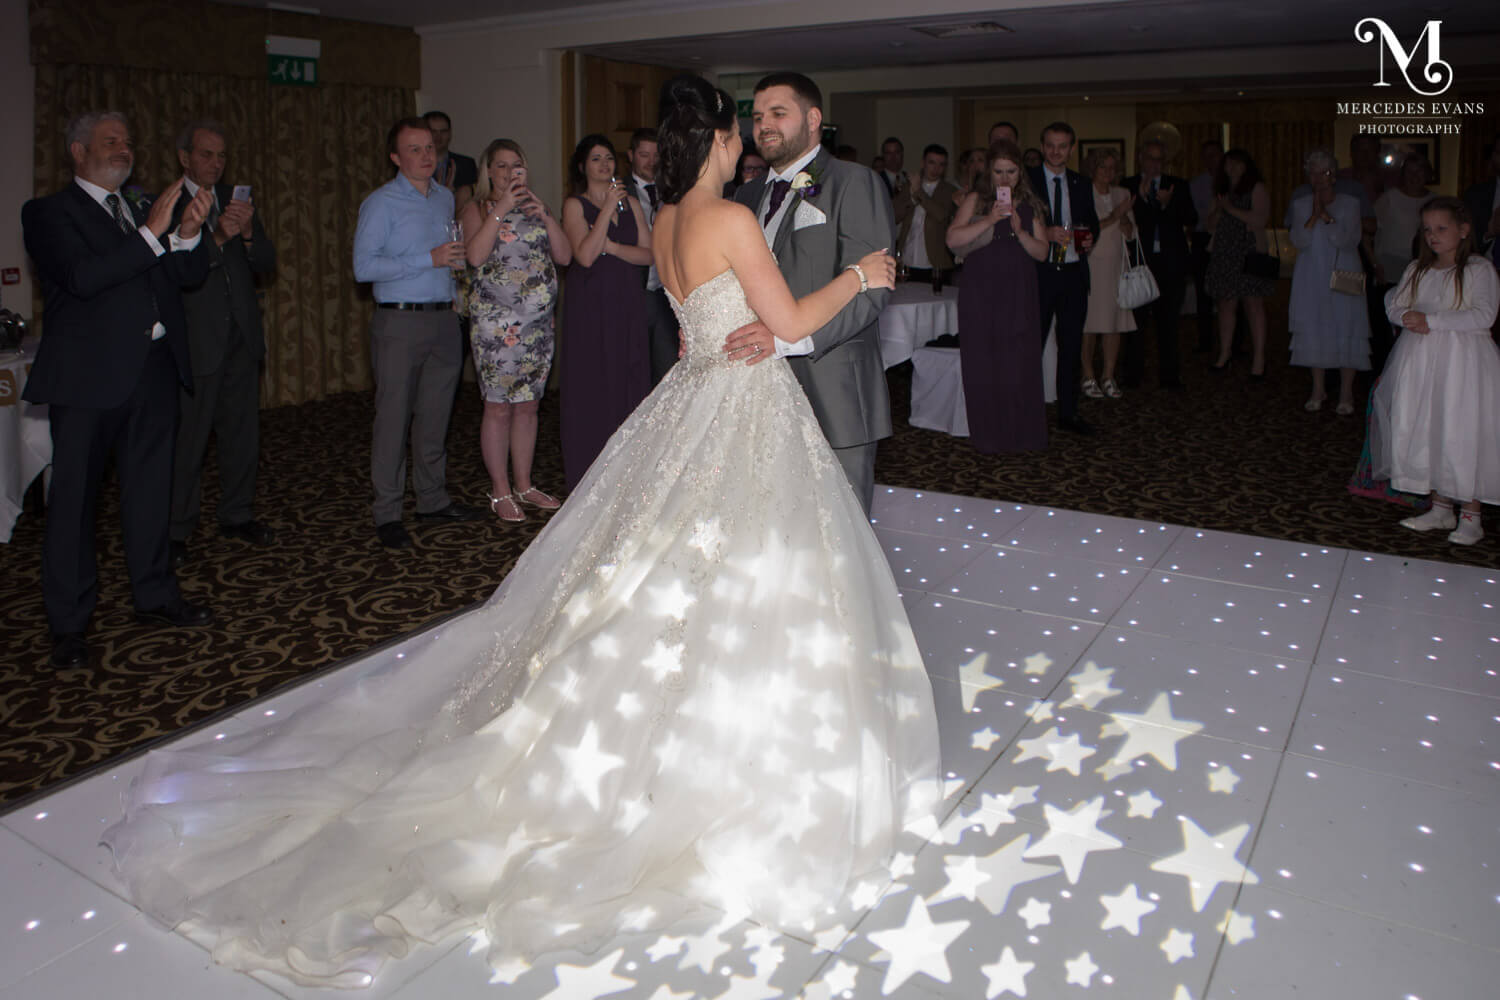 The newly weds enjoy their first dance together in the Frimley Suite at Frimley Hall Hotel